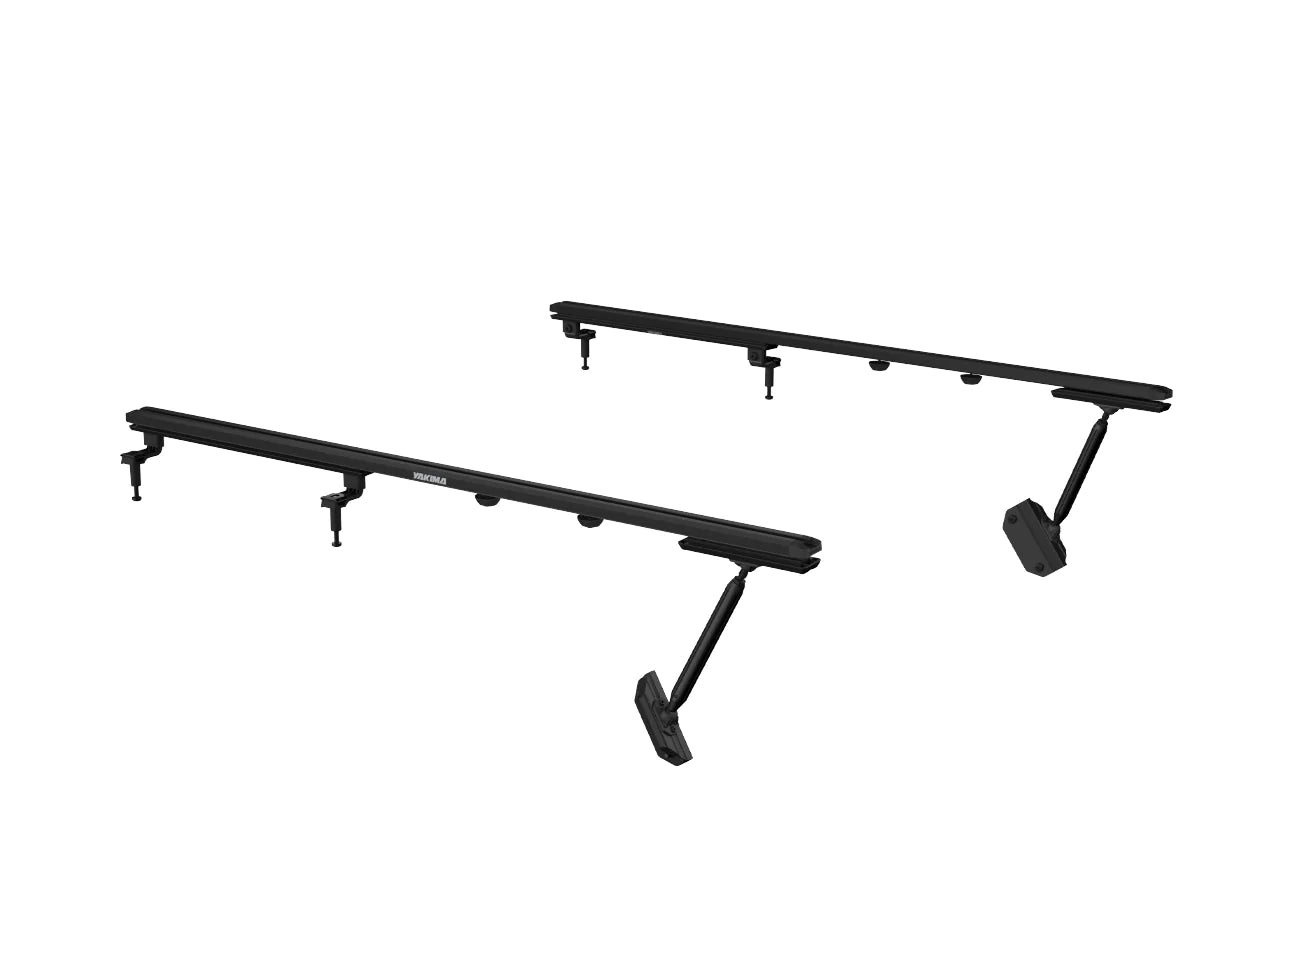 RibCage JL 4Dr Custom Rooftop Track System with Internal Supports 8001052